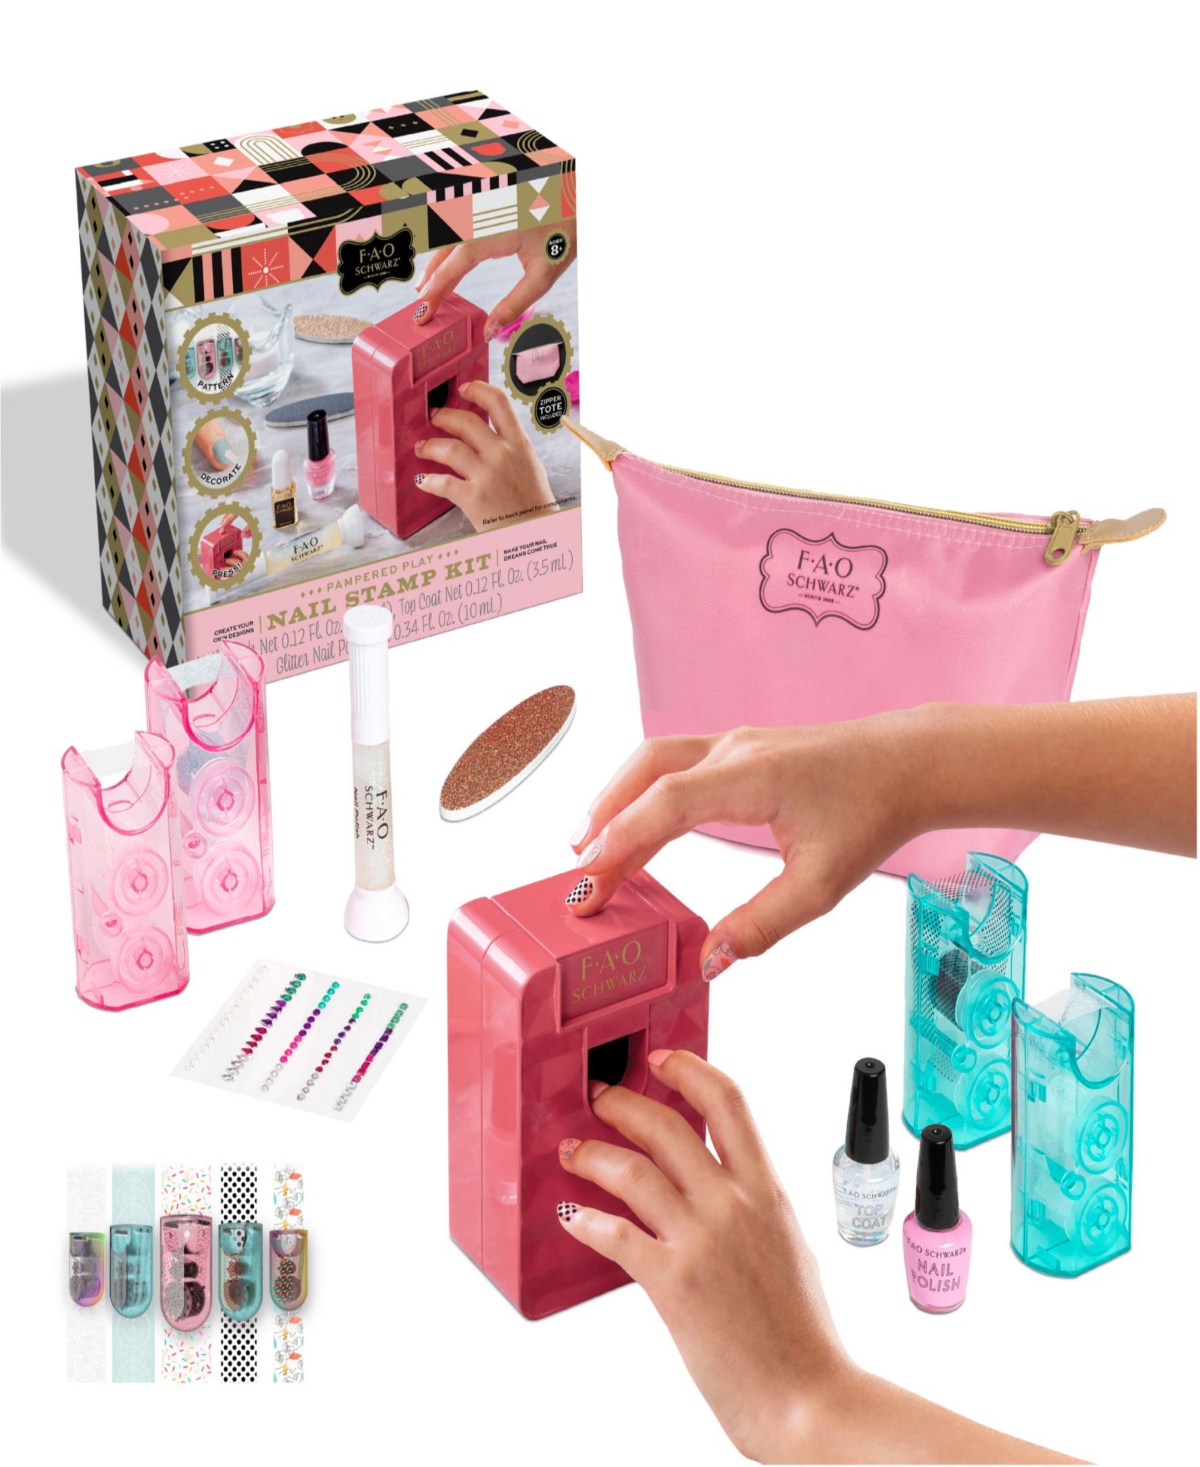 Nail Salon Toy 76-piece Pampered Play Day Spa Beauty Set by FAO Schwarz for sale online 